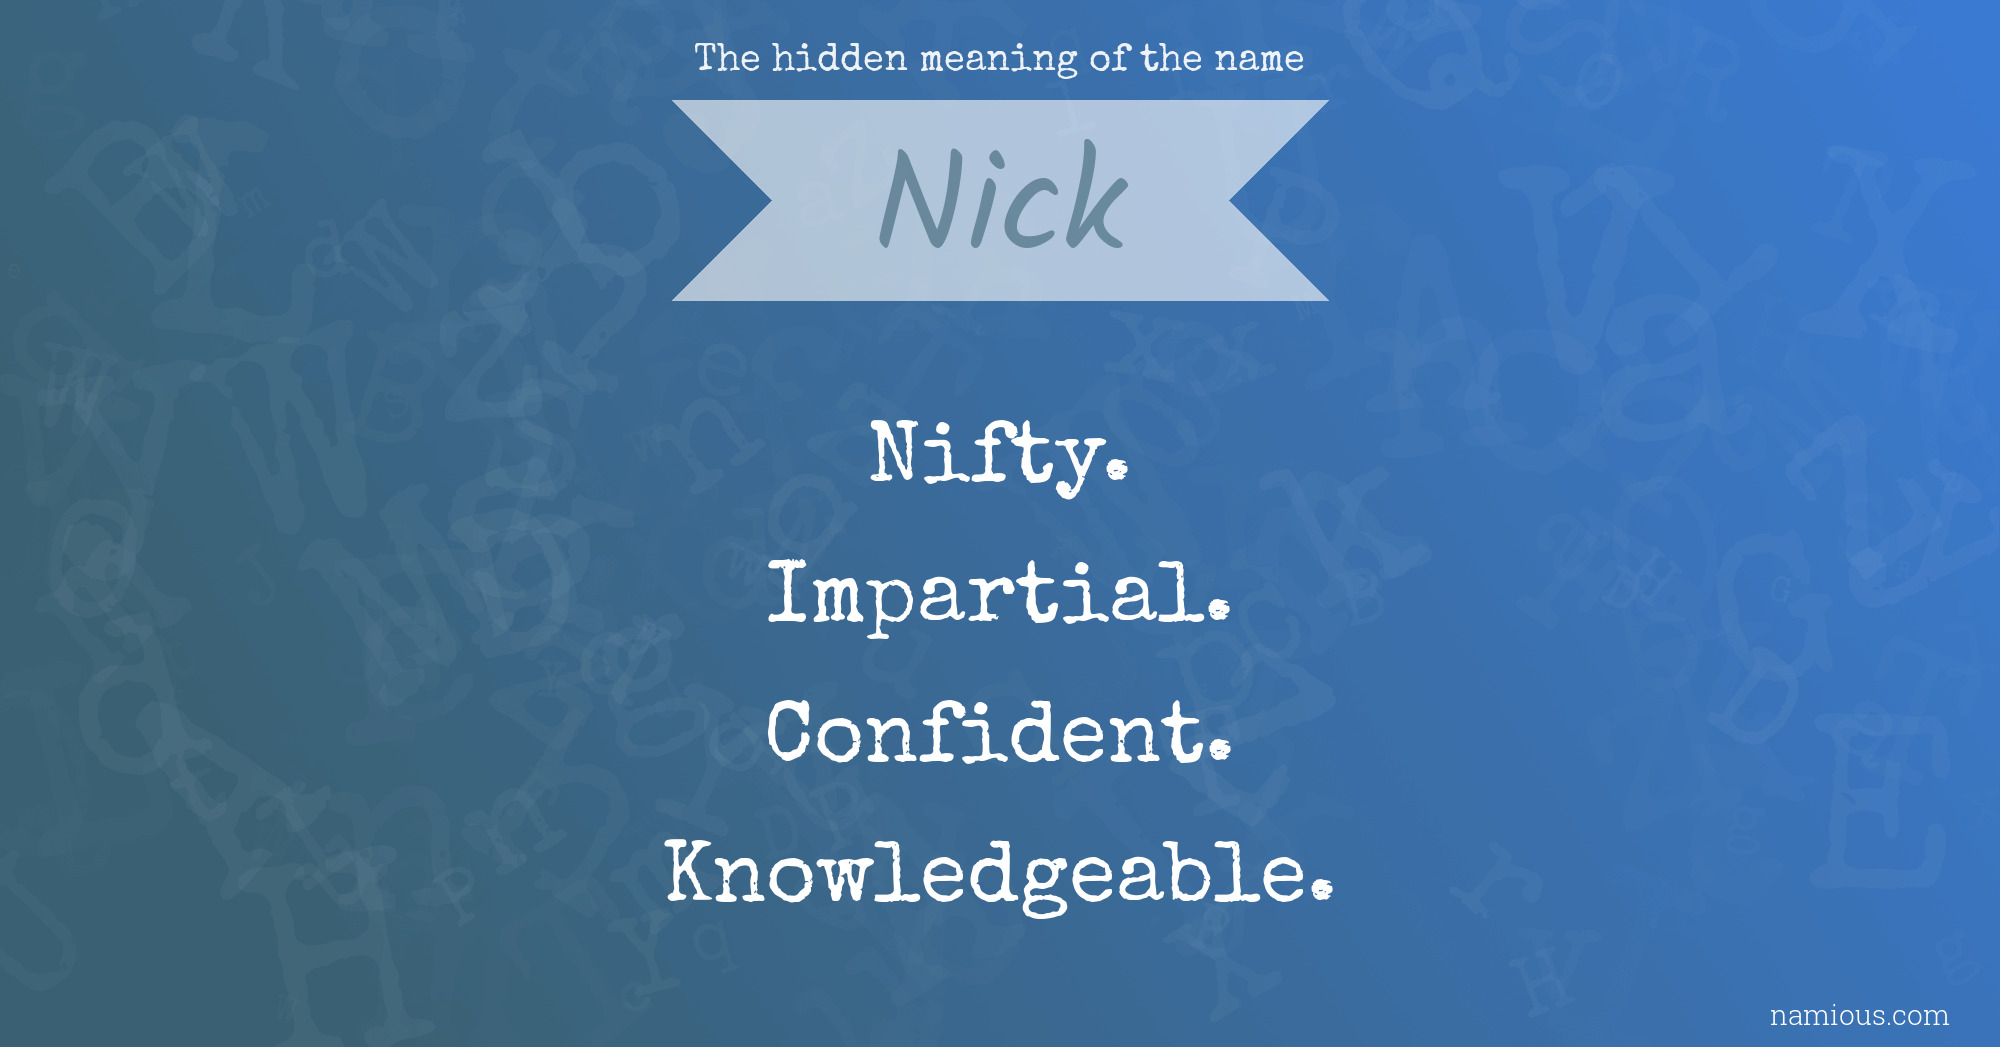 The hidden meaning of the name Nick